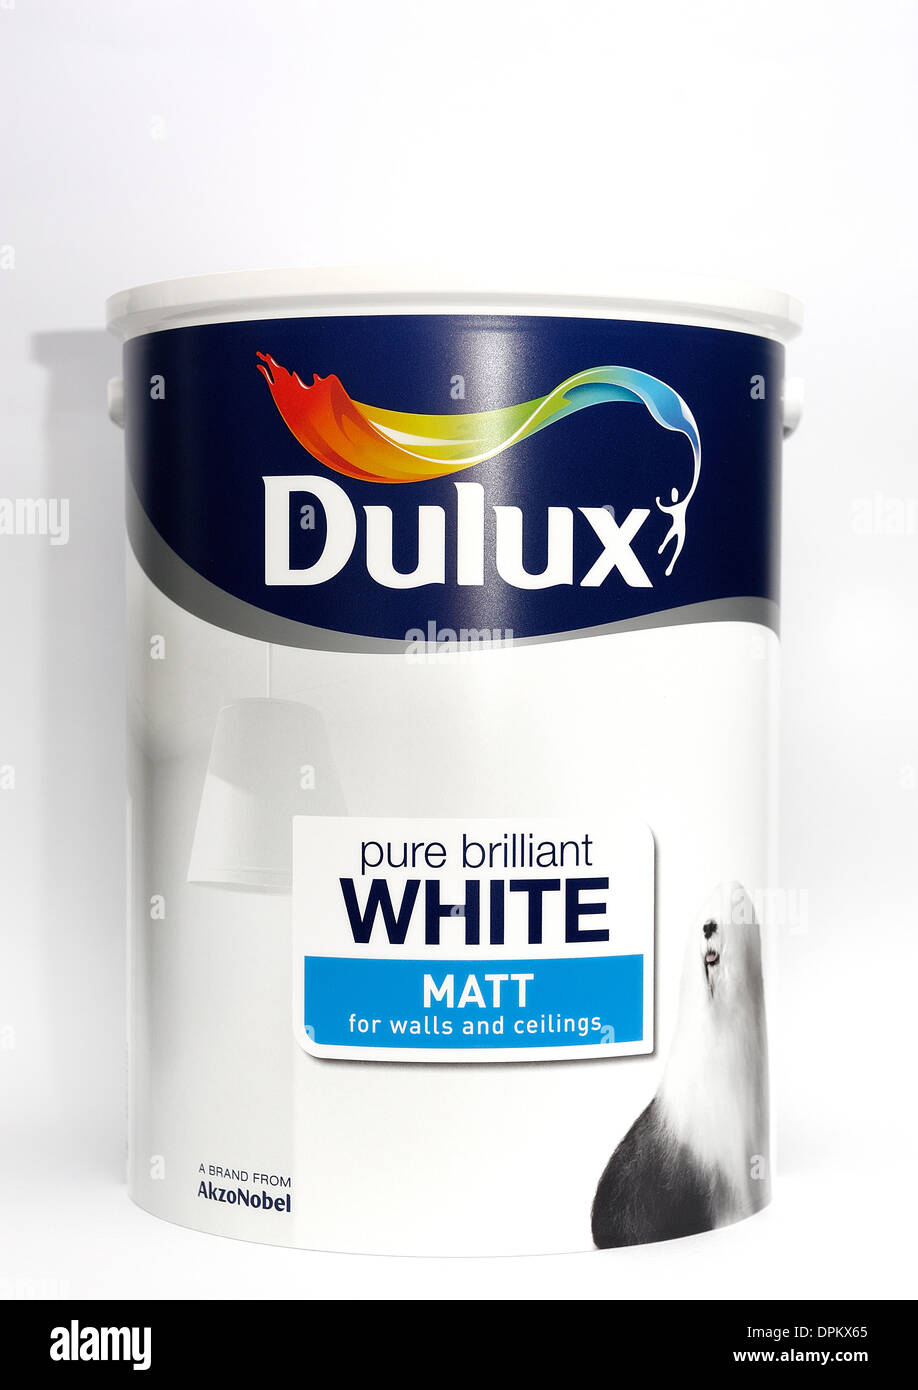  Dulux  High Resolution Stock Photography and Images Alamy